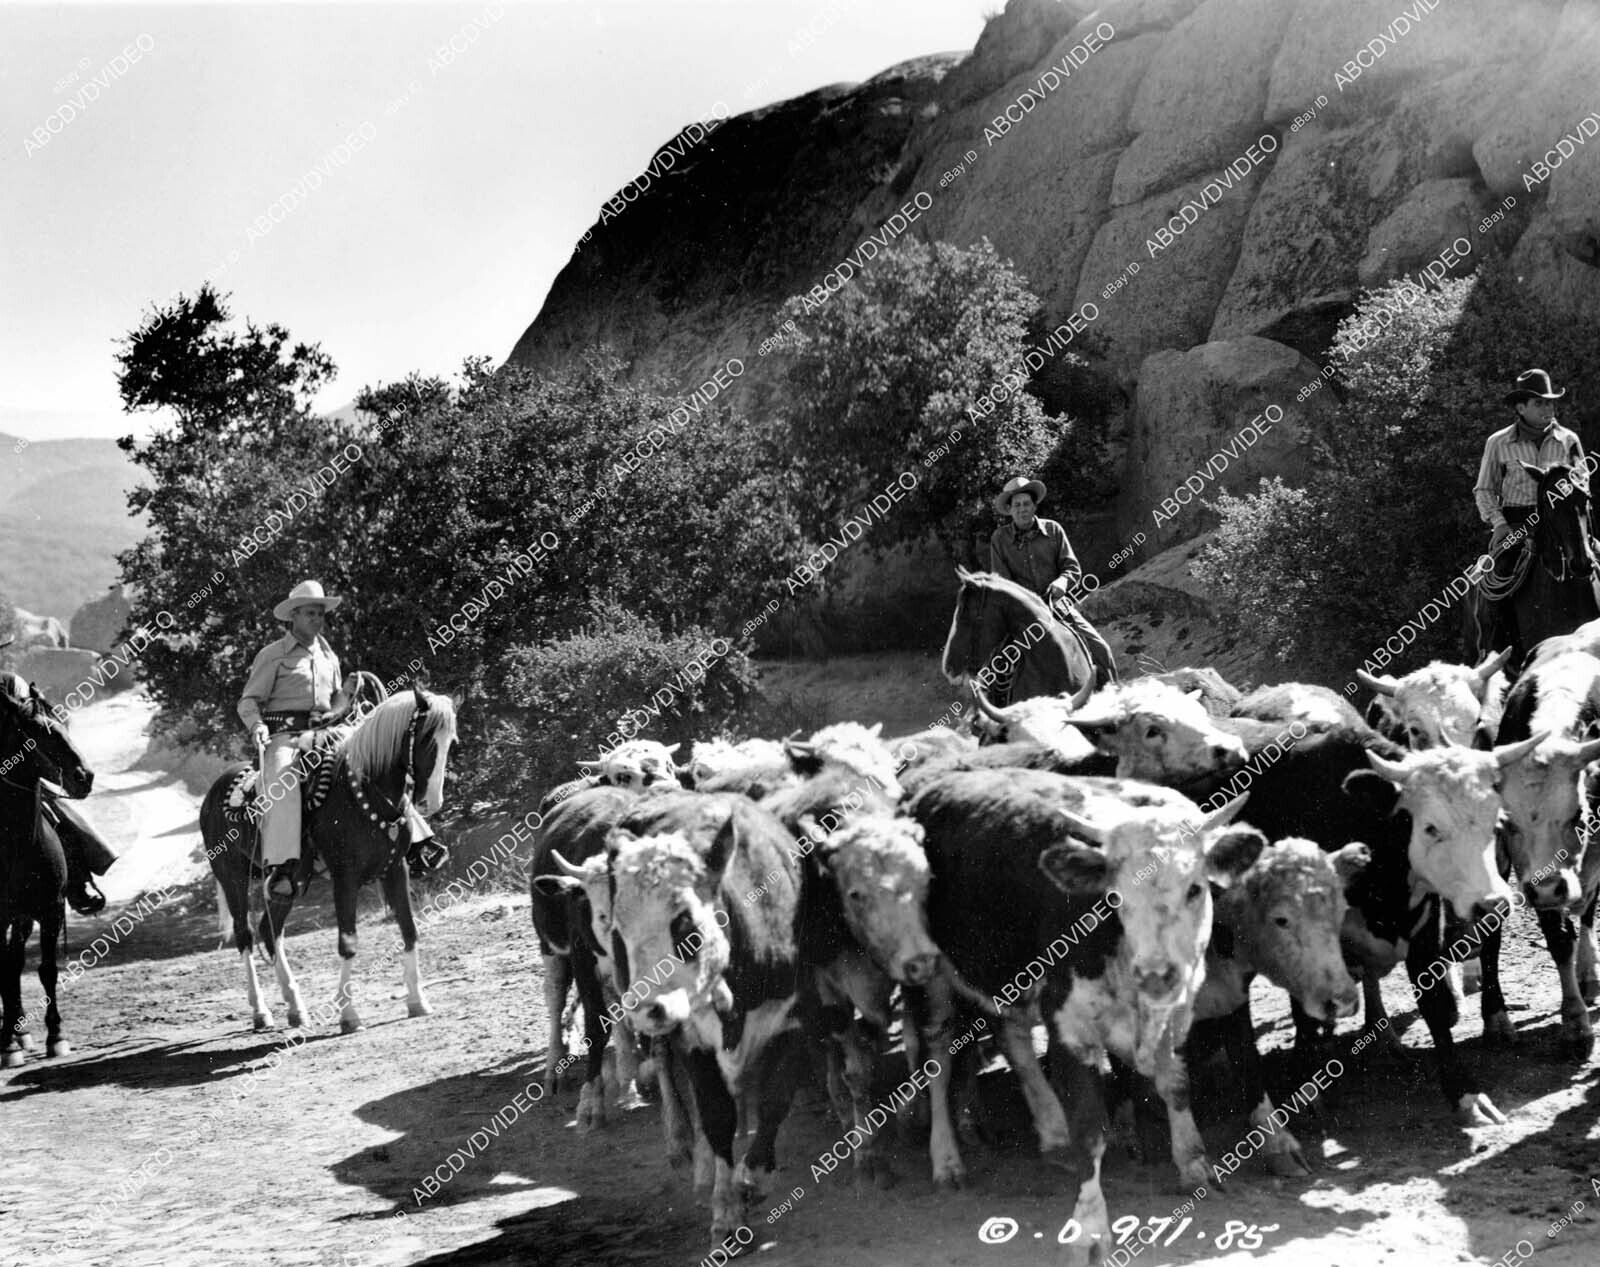 crp-31065 1949 Gene Autry on cattle drive film Riders in the Sky crp-31065